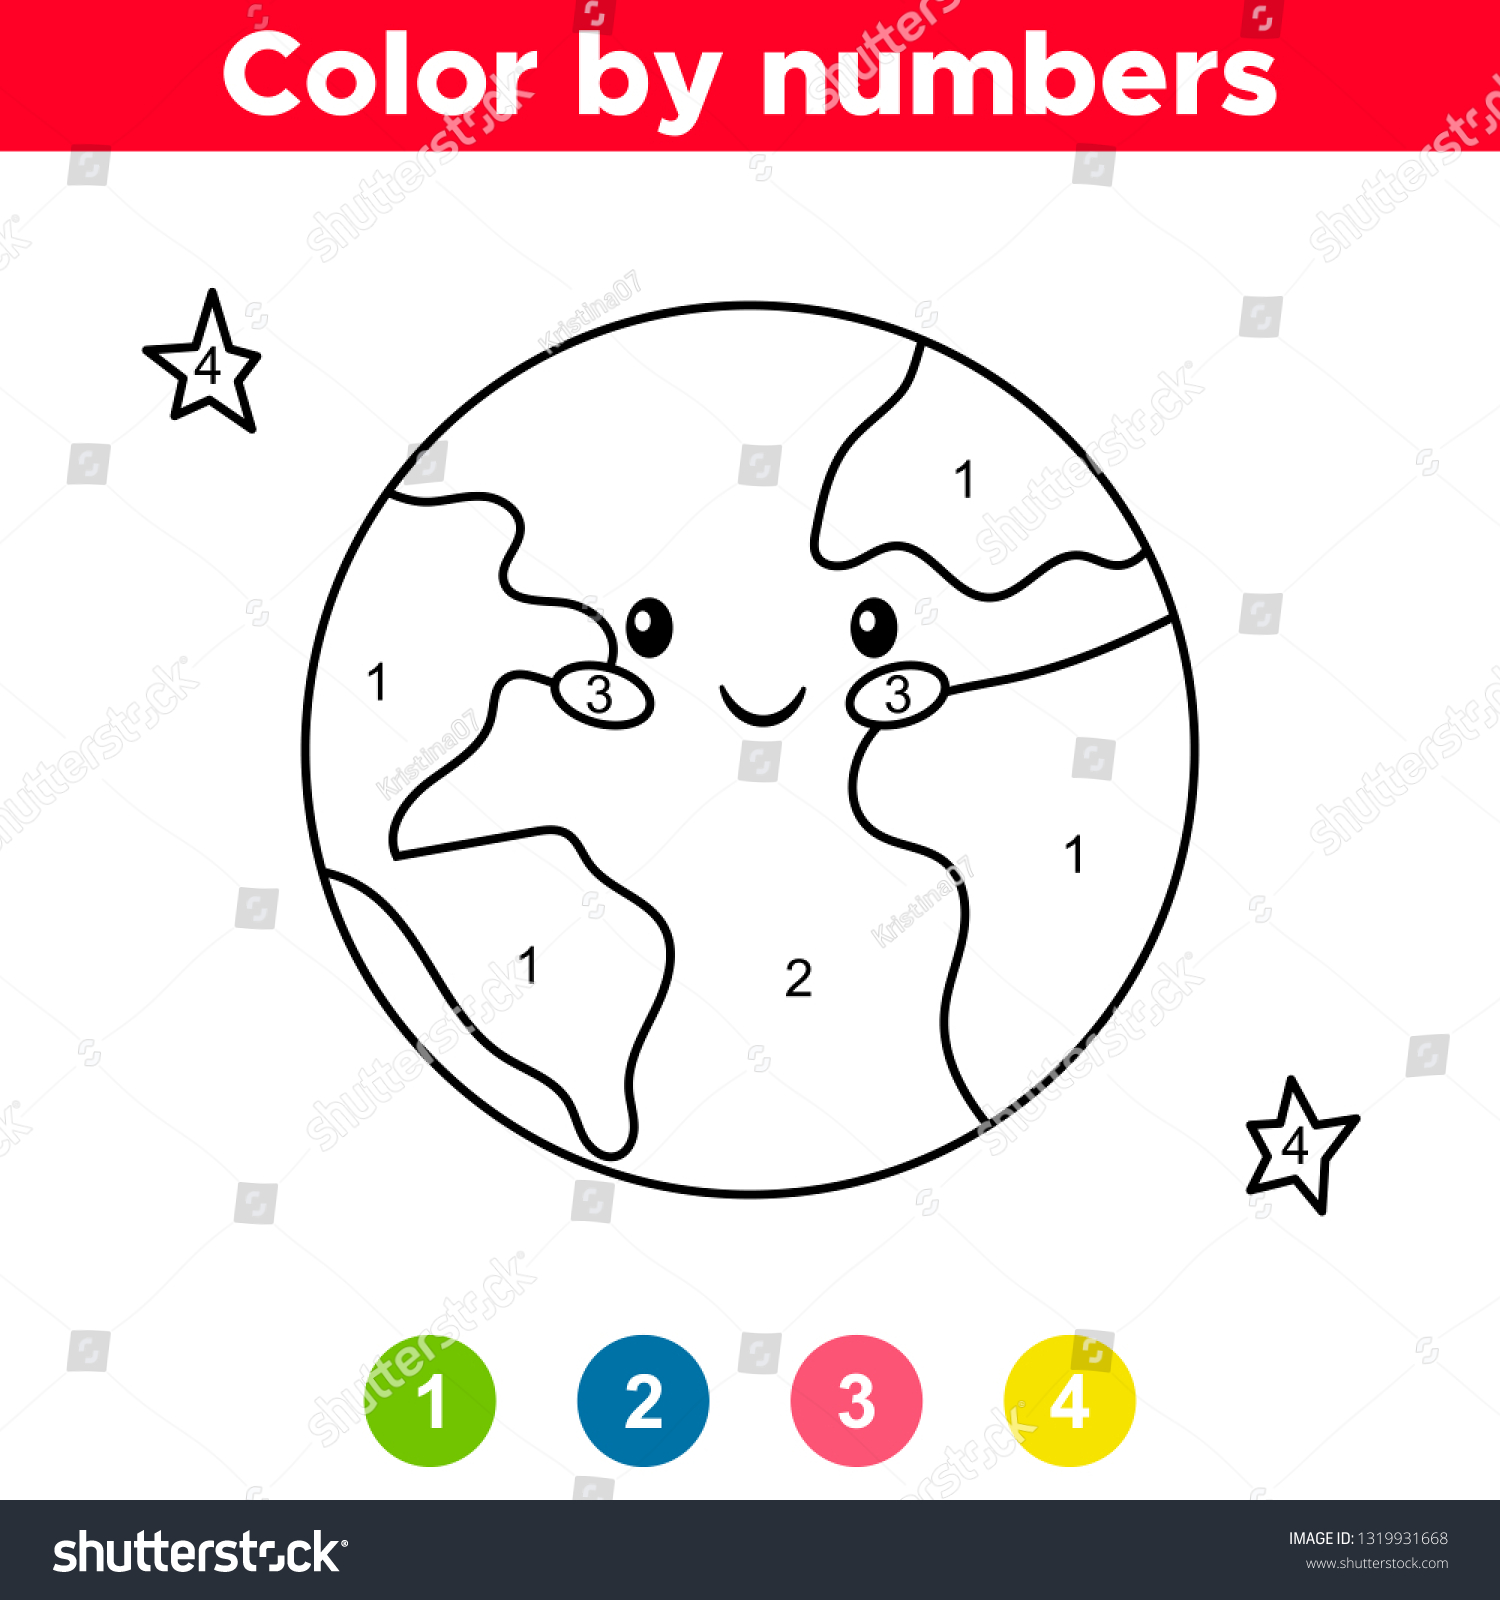 color by number preschool worksheets mamas learning corner